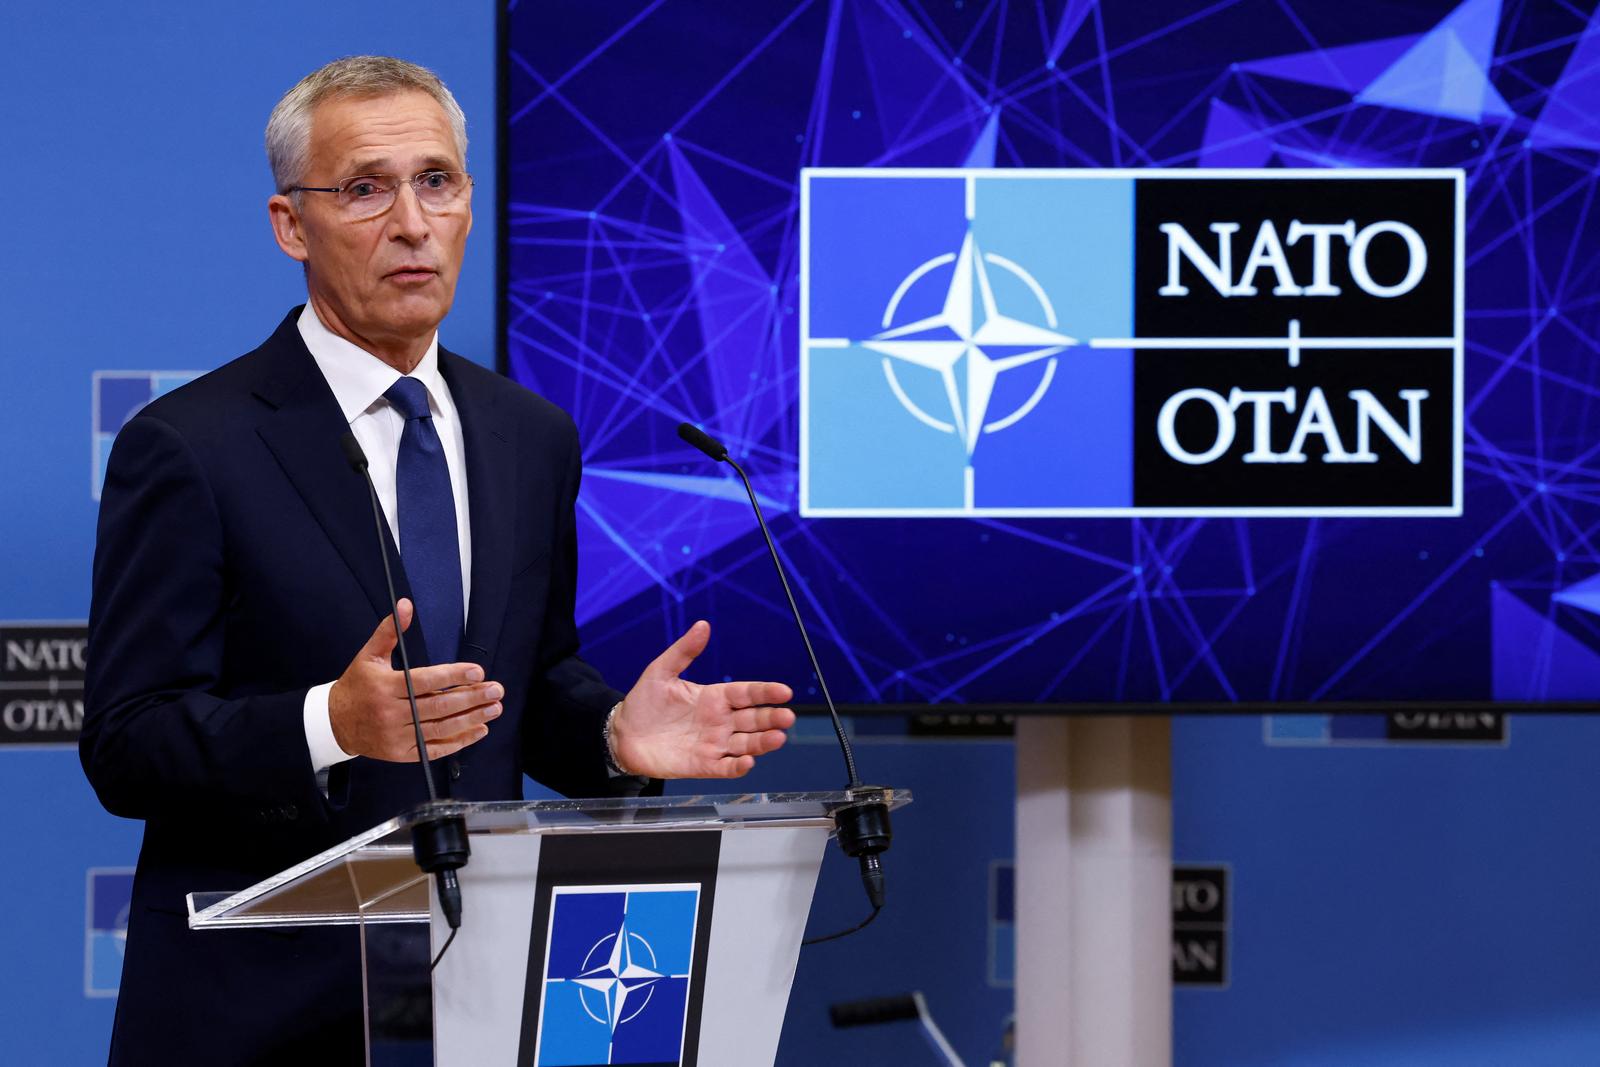 NATO Secretary General Jens Stoltenberg speaks during a news conference at the Alliance's headquarters in Brussels, Belgium September 30, 2022. REUTERS/Yves Herman Photo: YVES HERMAN/REUTERS